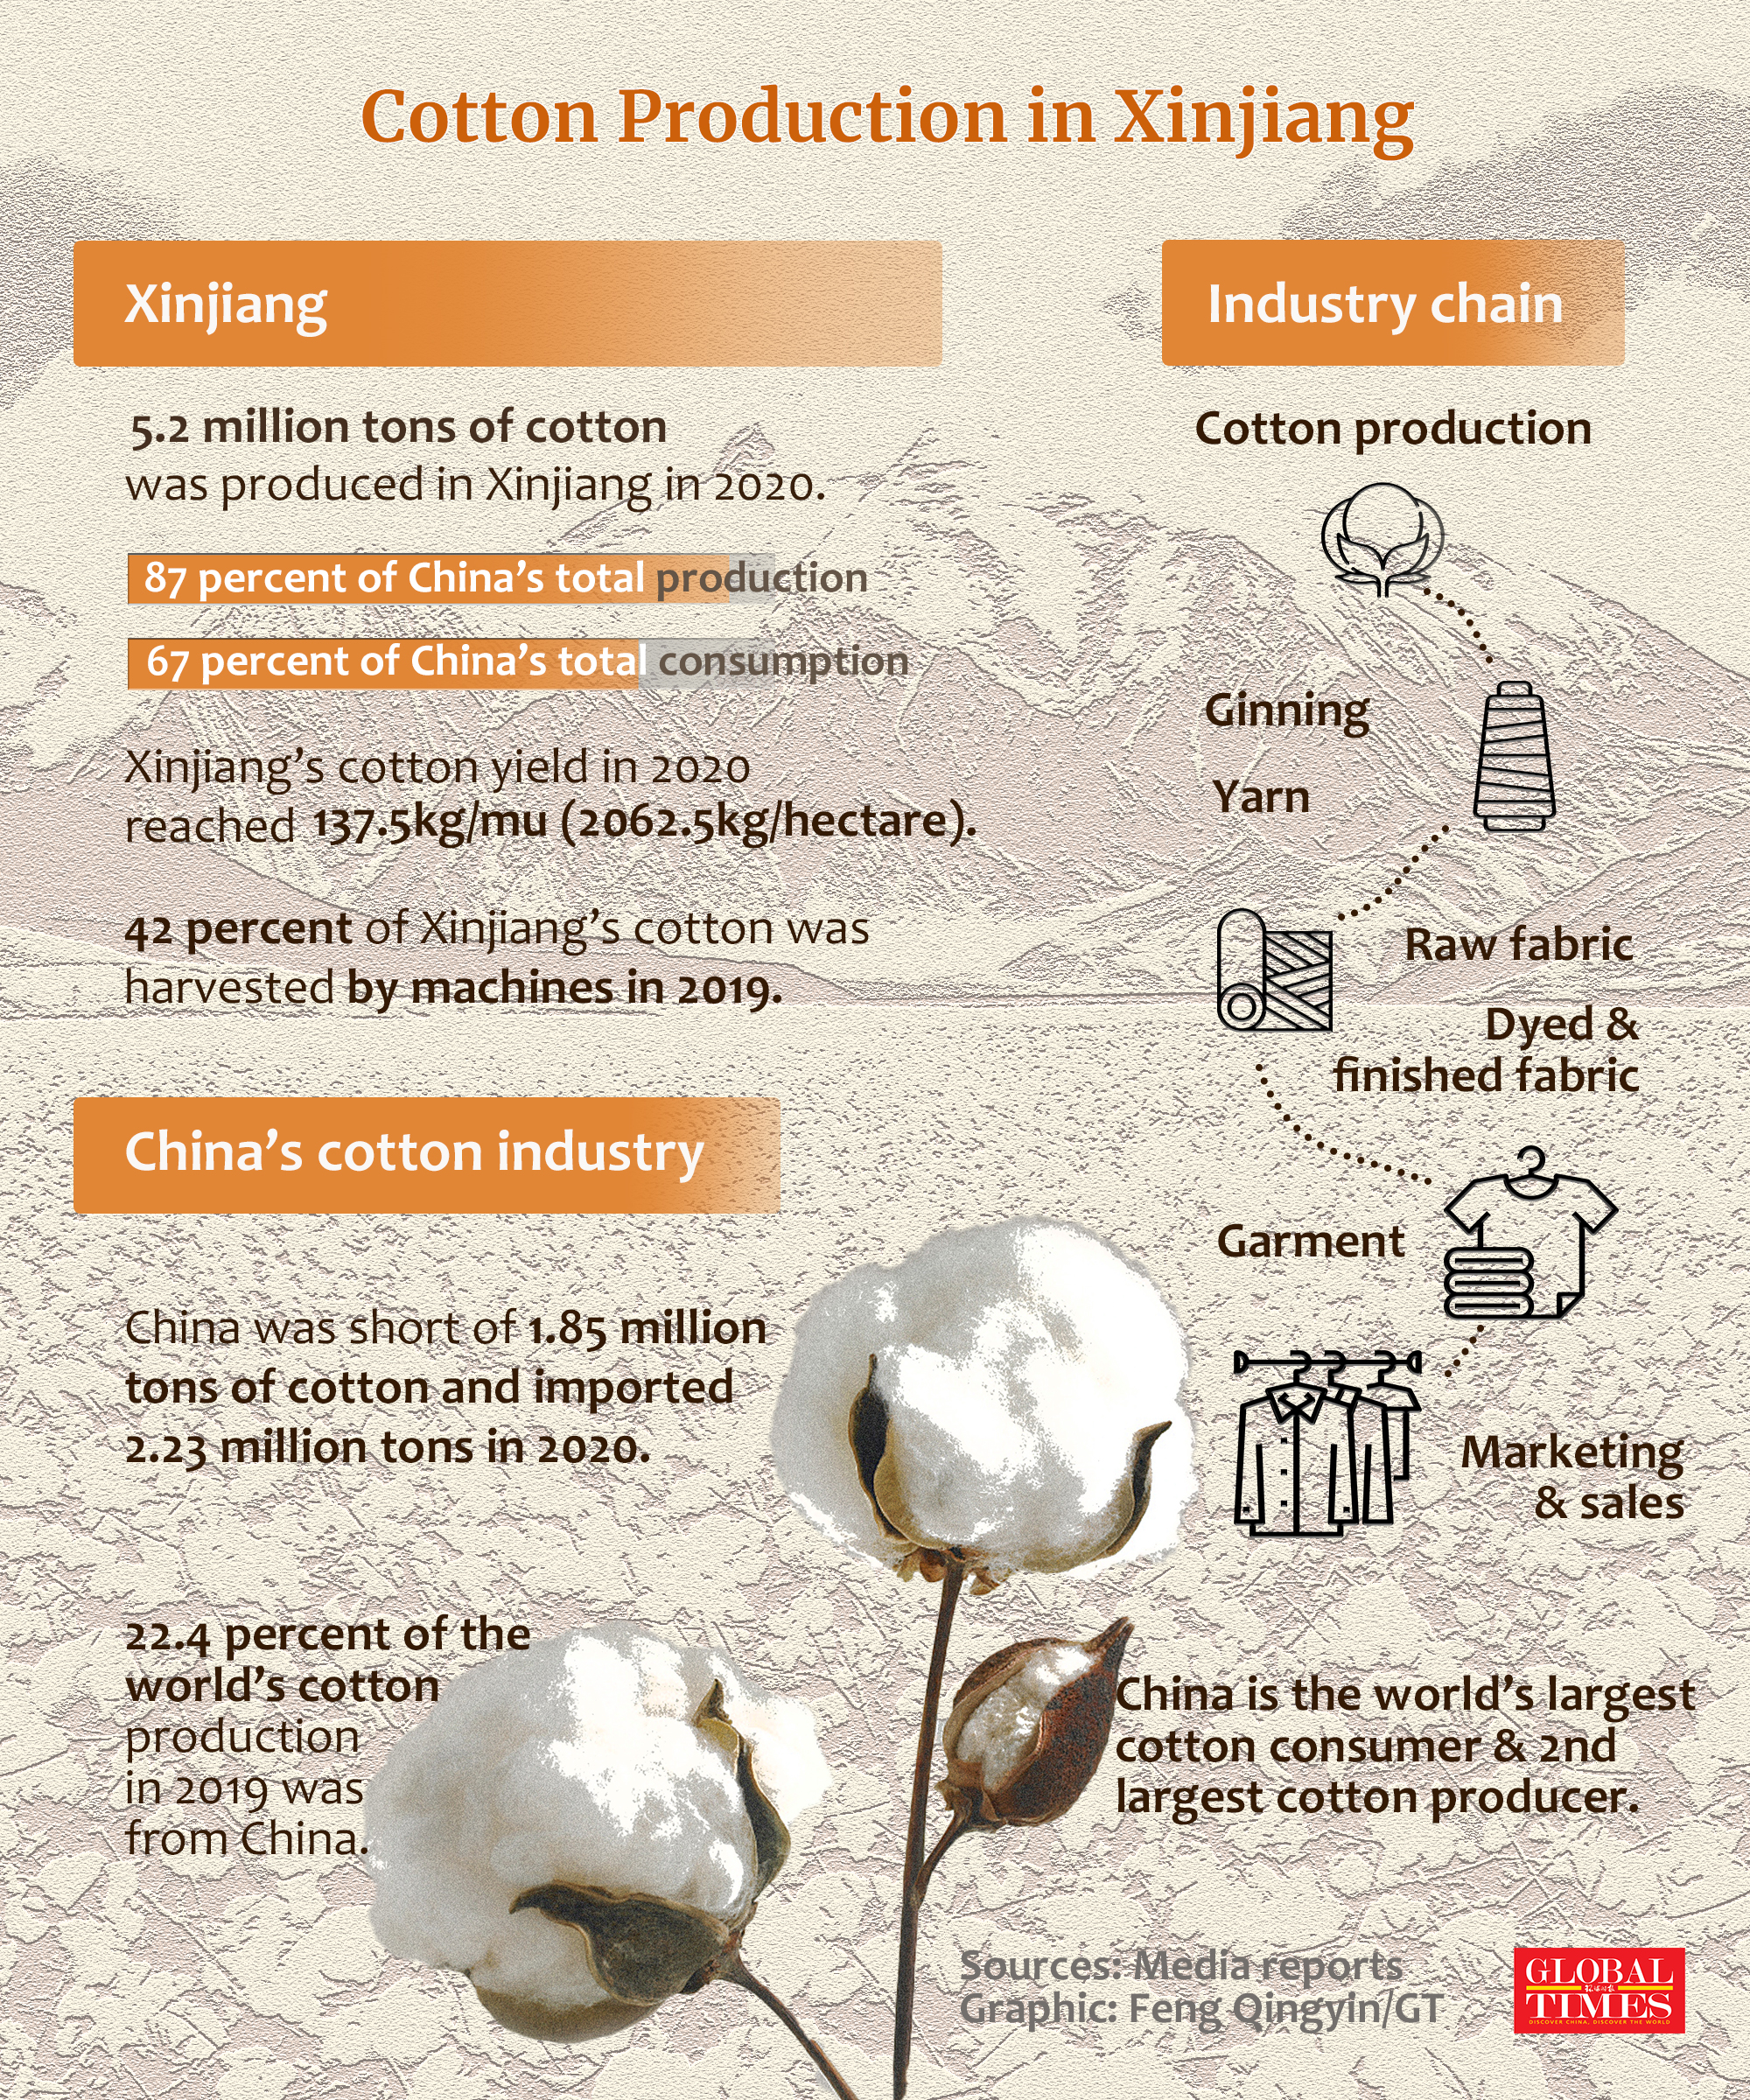 Key figures about #XinjiangCotton:
- Cotton produced in Xinjiang makes up 87% of China's total production
- 42% of cotton was harvested by machines in Xinjiang
- Nearly one-quarter of the world's cotton production was from China 
